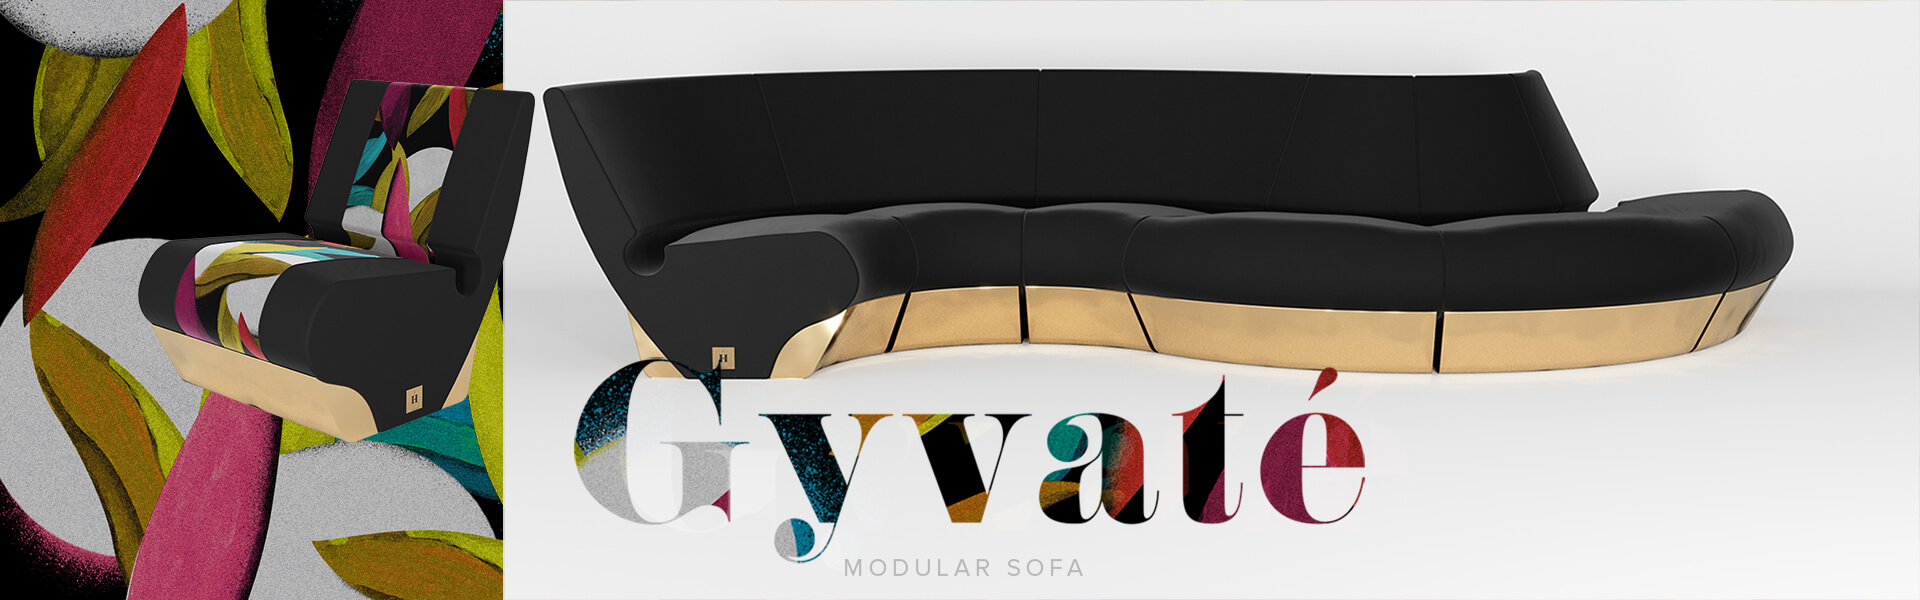 curved sofa for luxury living room